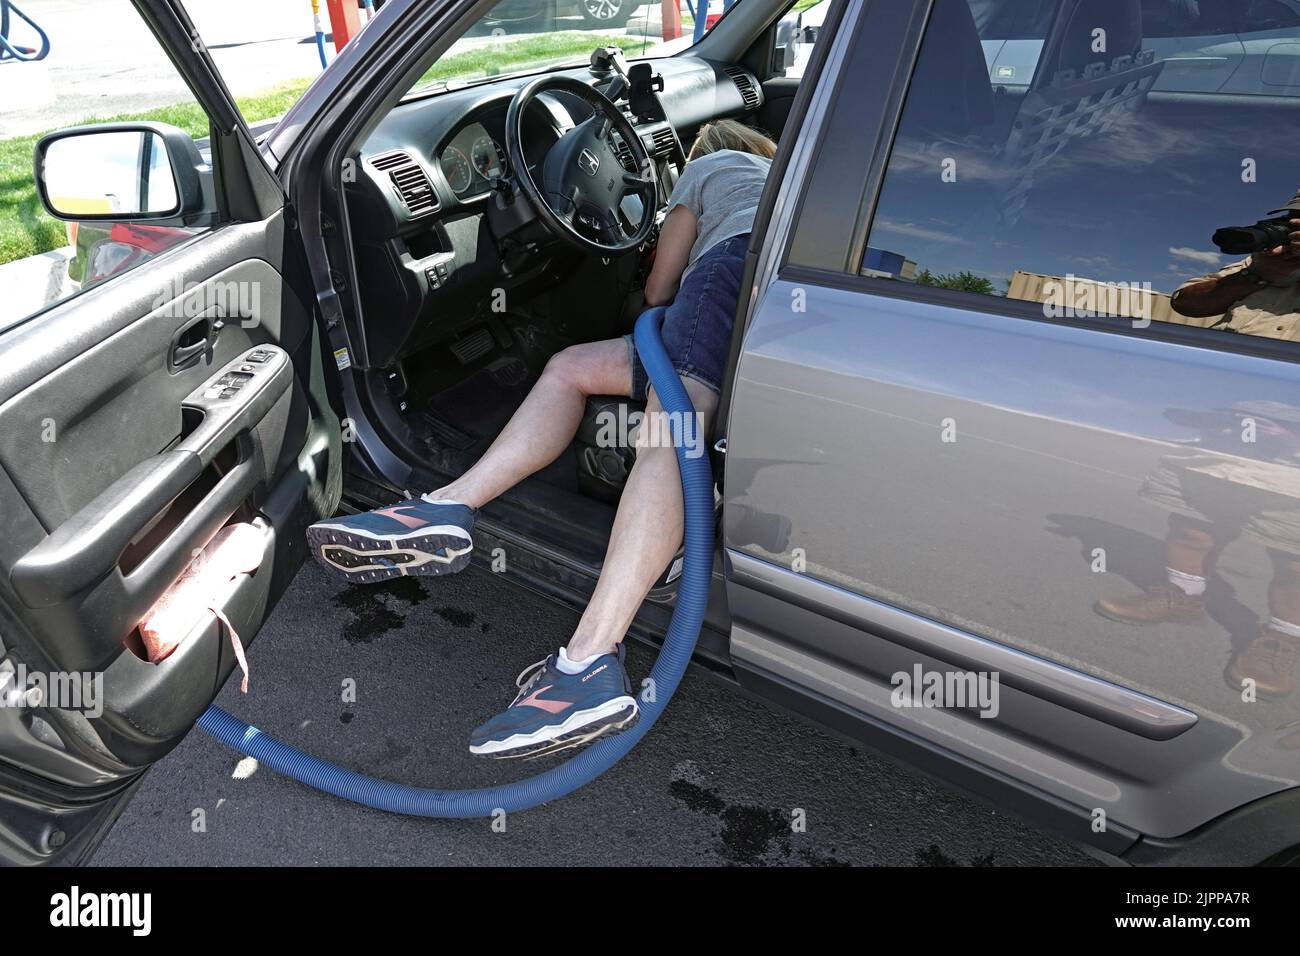 A woman vacuuming her car at a public car wash in Bend, Oregon. Stock Photo